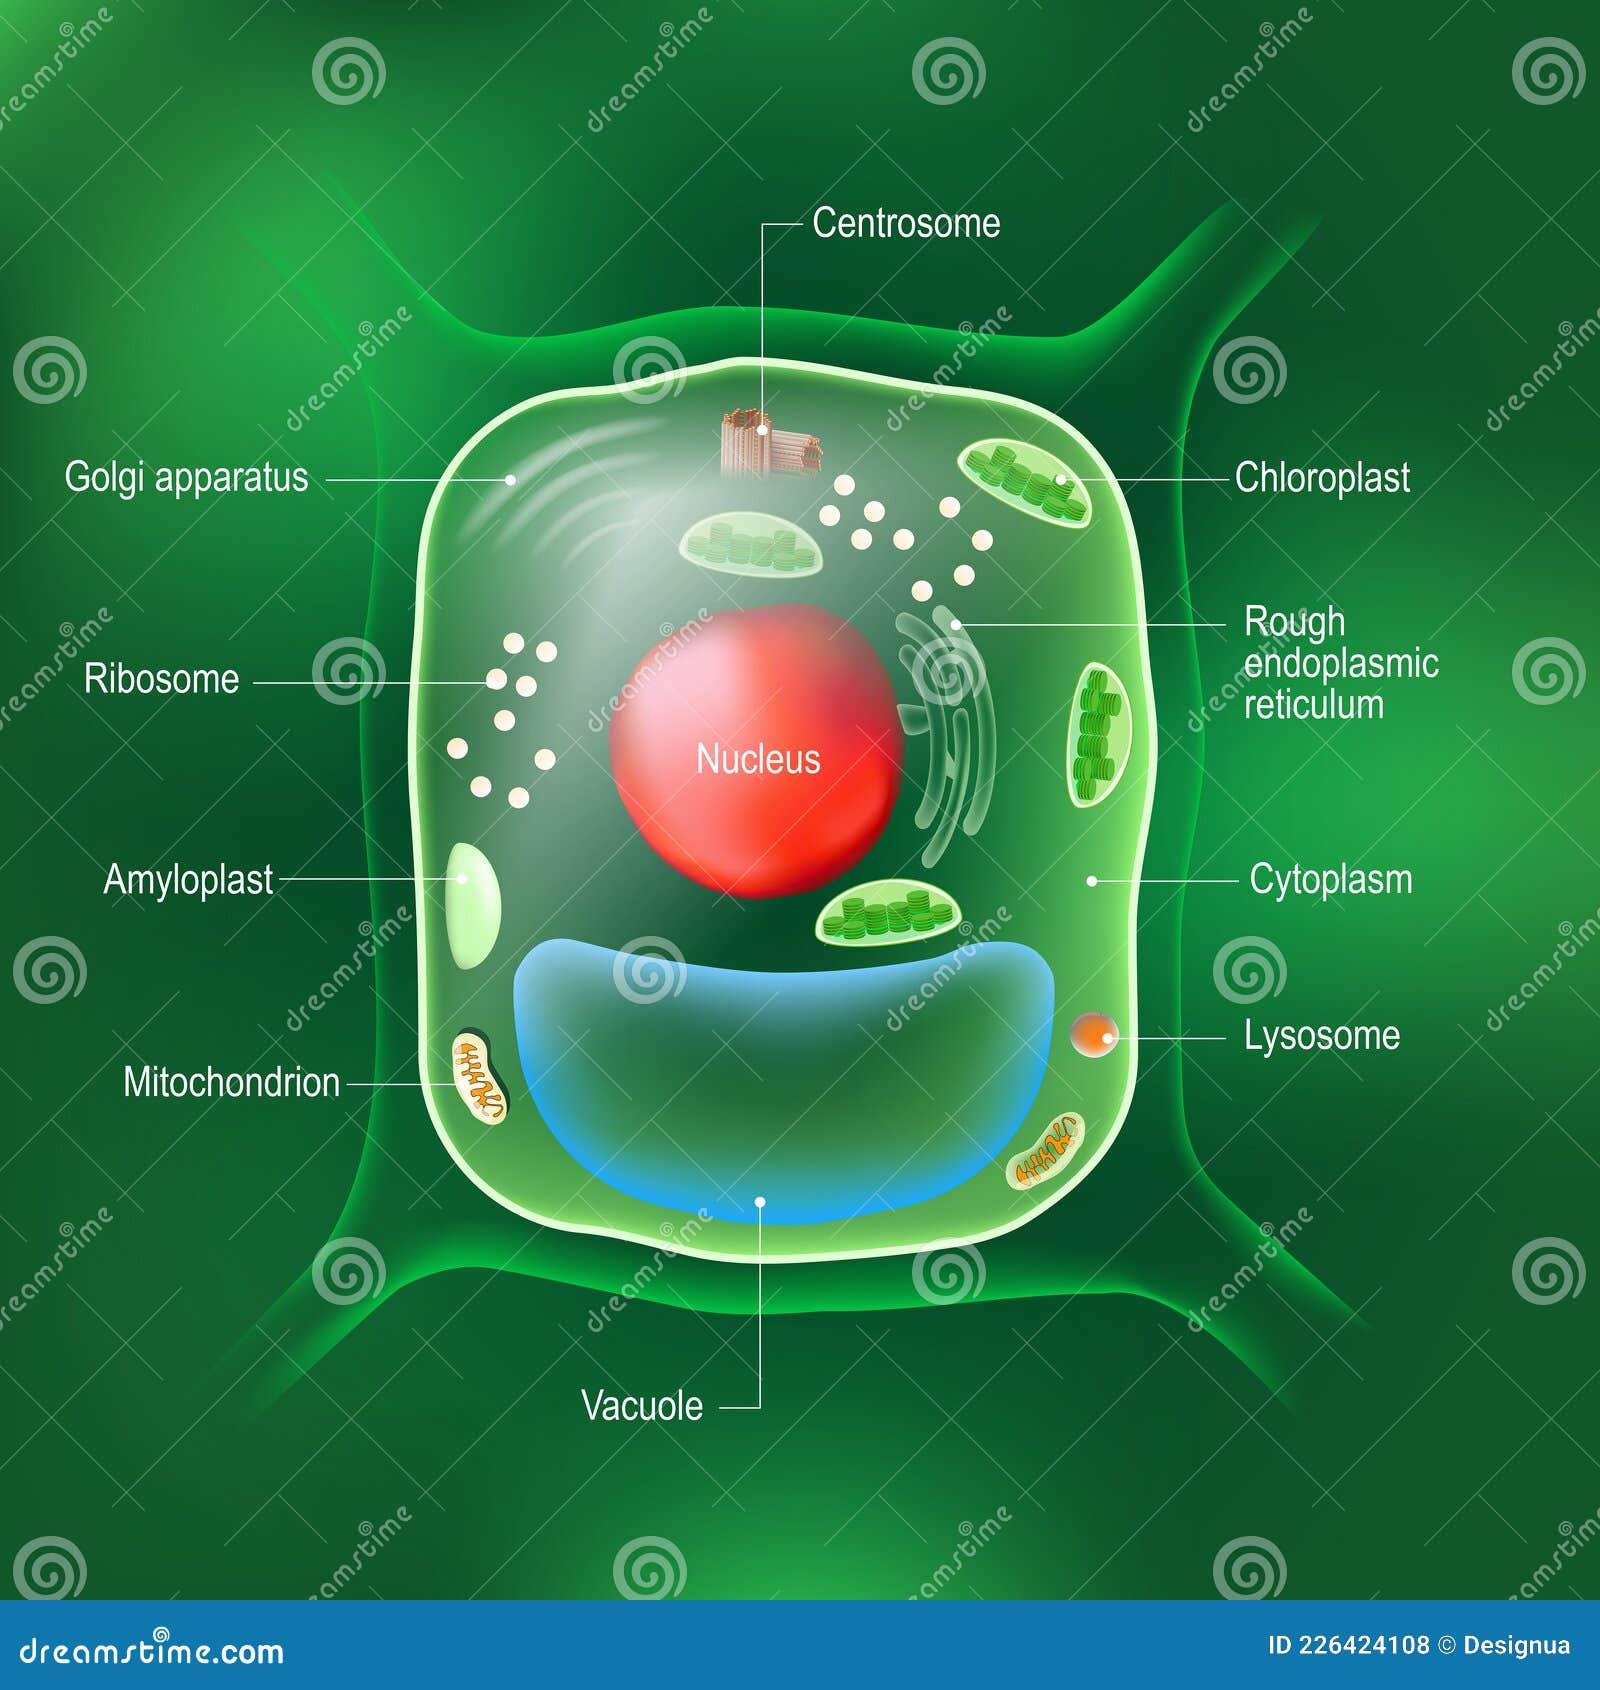 anatomy of plant cell. all organelles